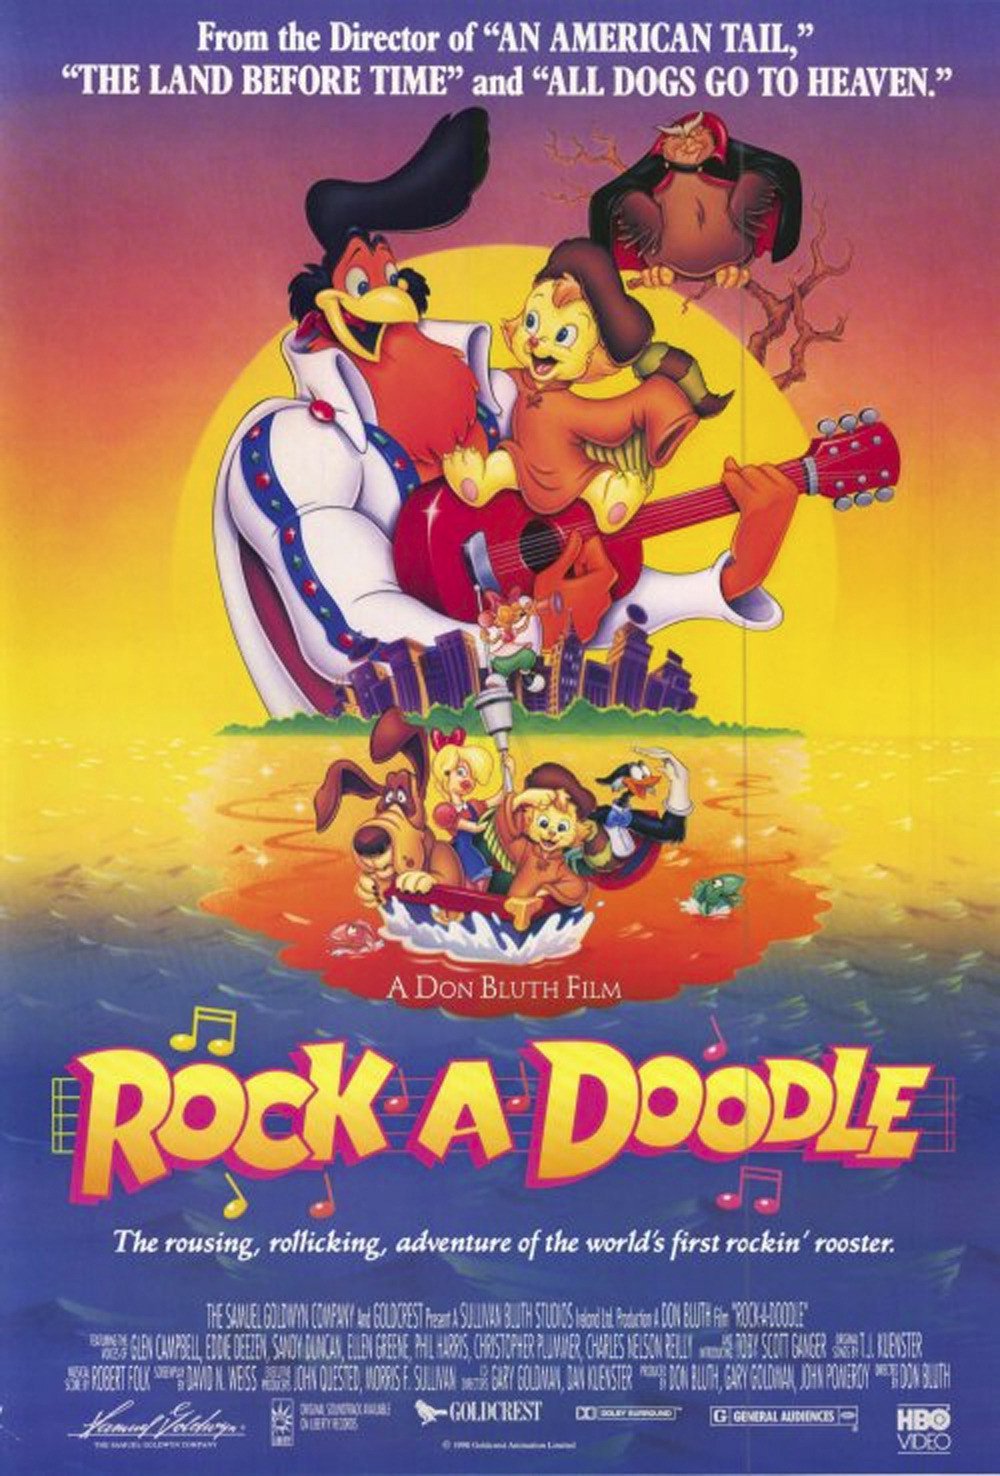 andri ang recommends cocka doodle doo movie pic